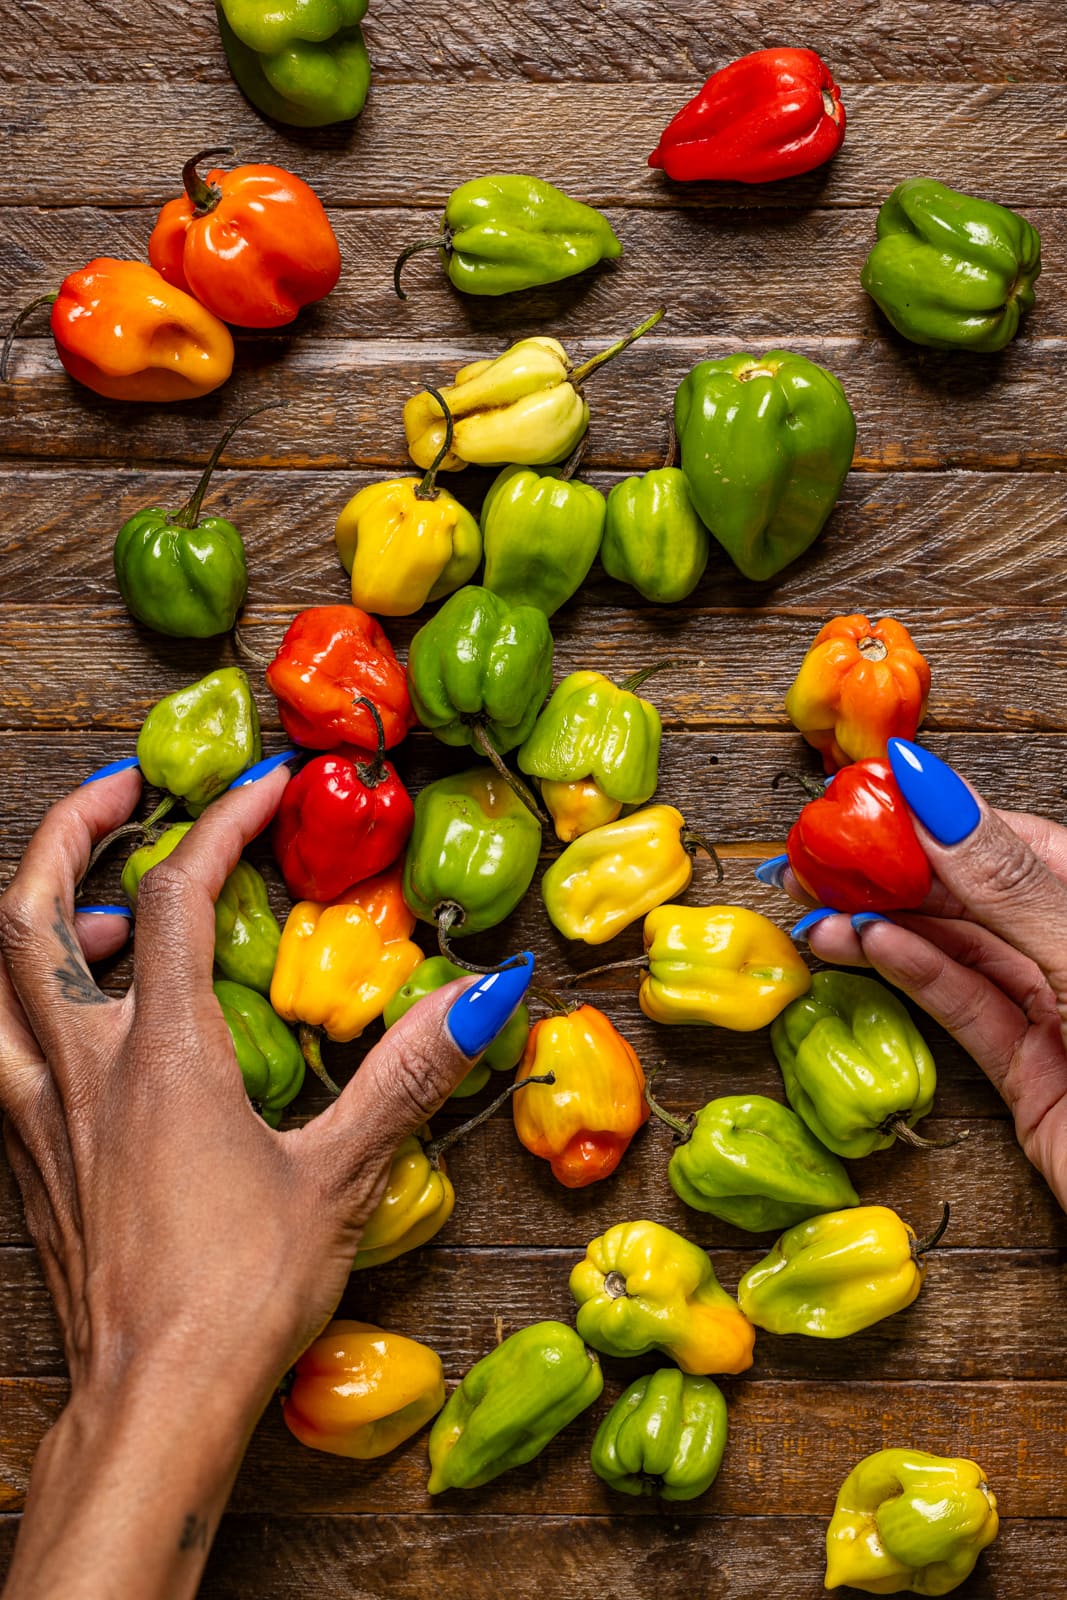 Scotch bonnet peppers on a brown wood table being held.